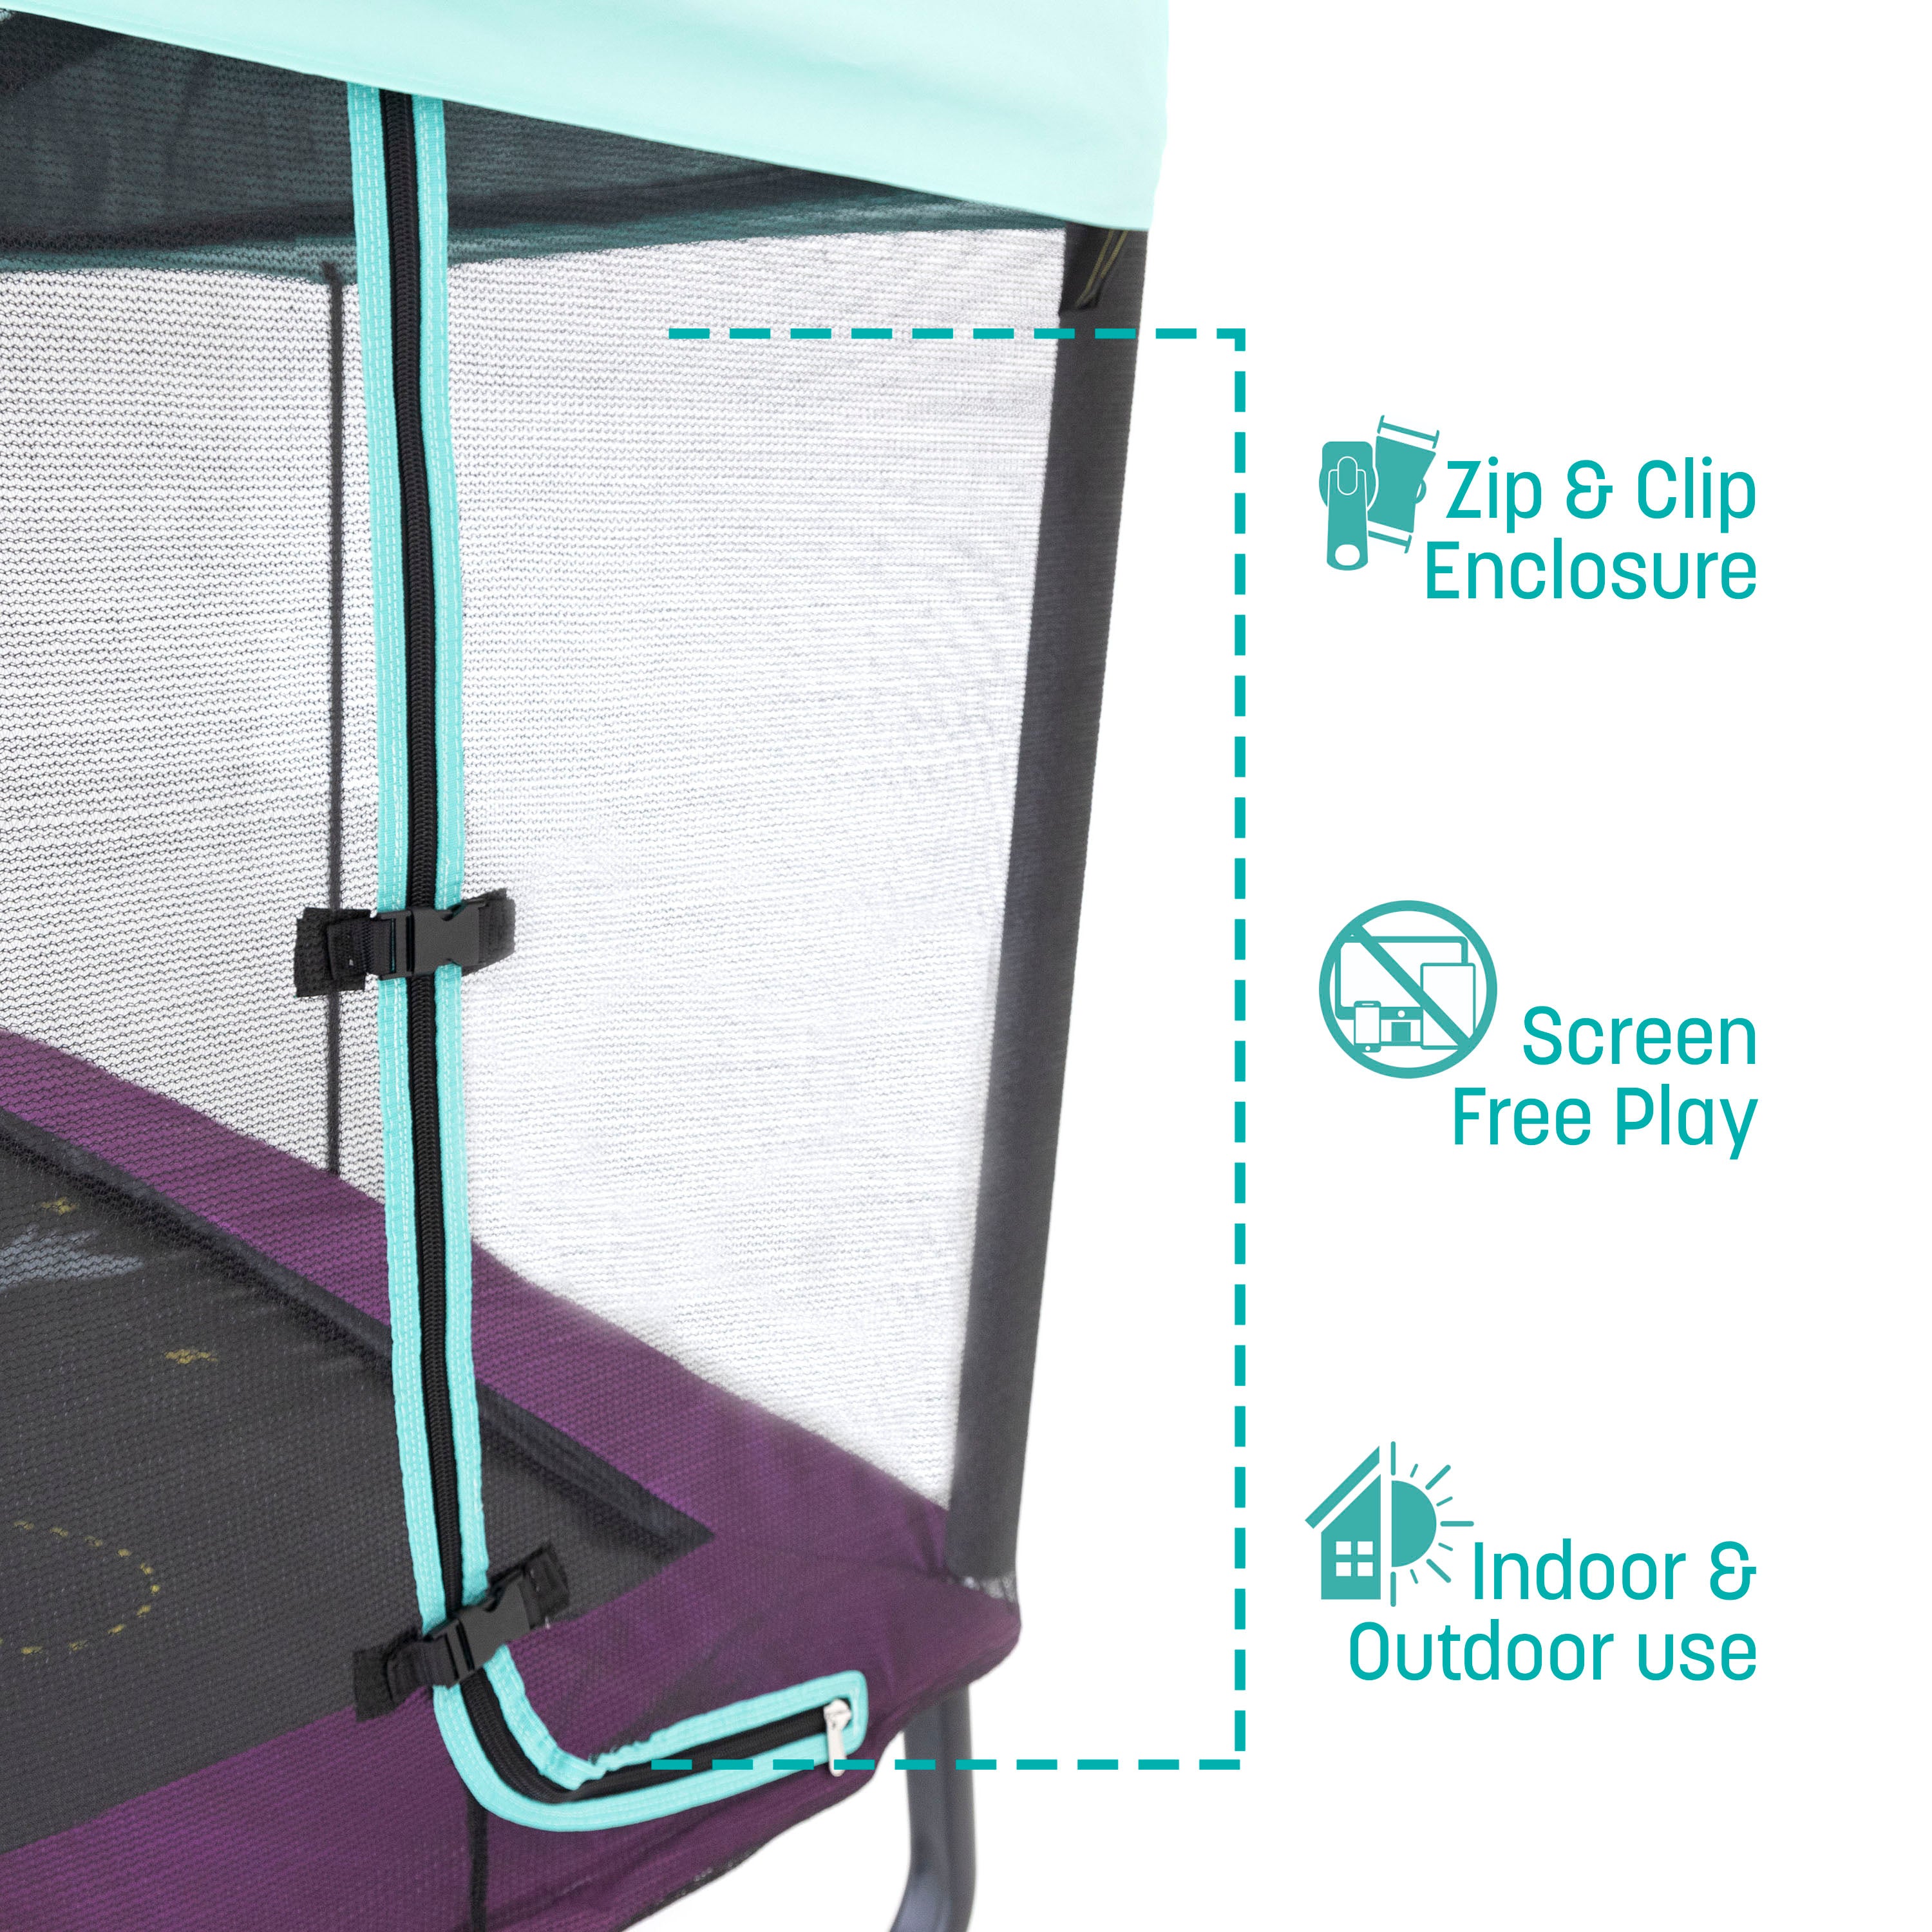 The trampoline has a light blue zipper. Three teal callout features state, “Zip & Clip Enclosure, Screen Free Play, Indoor & Outdoor use”. 